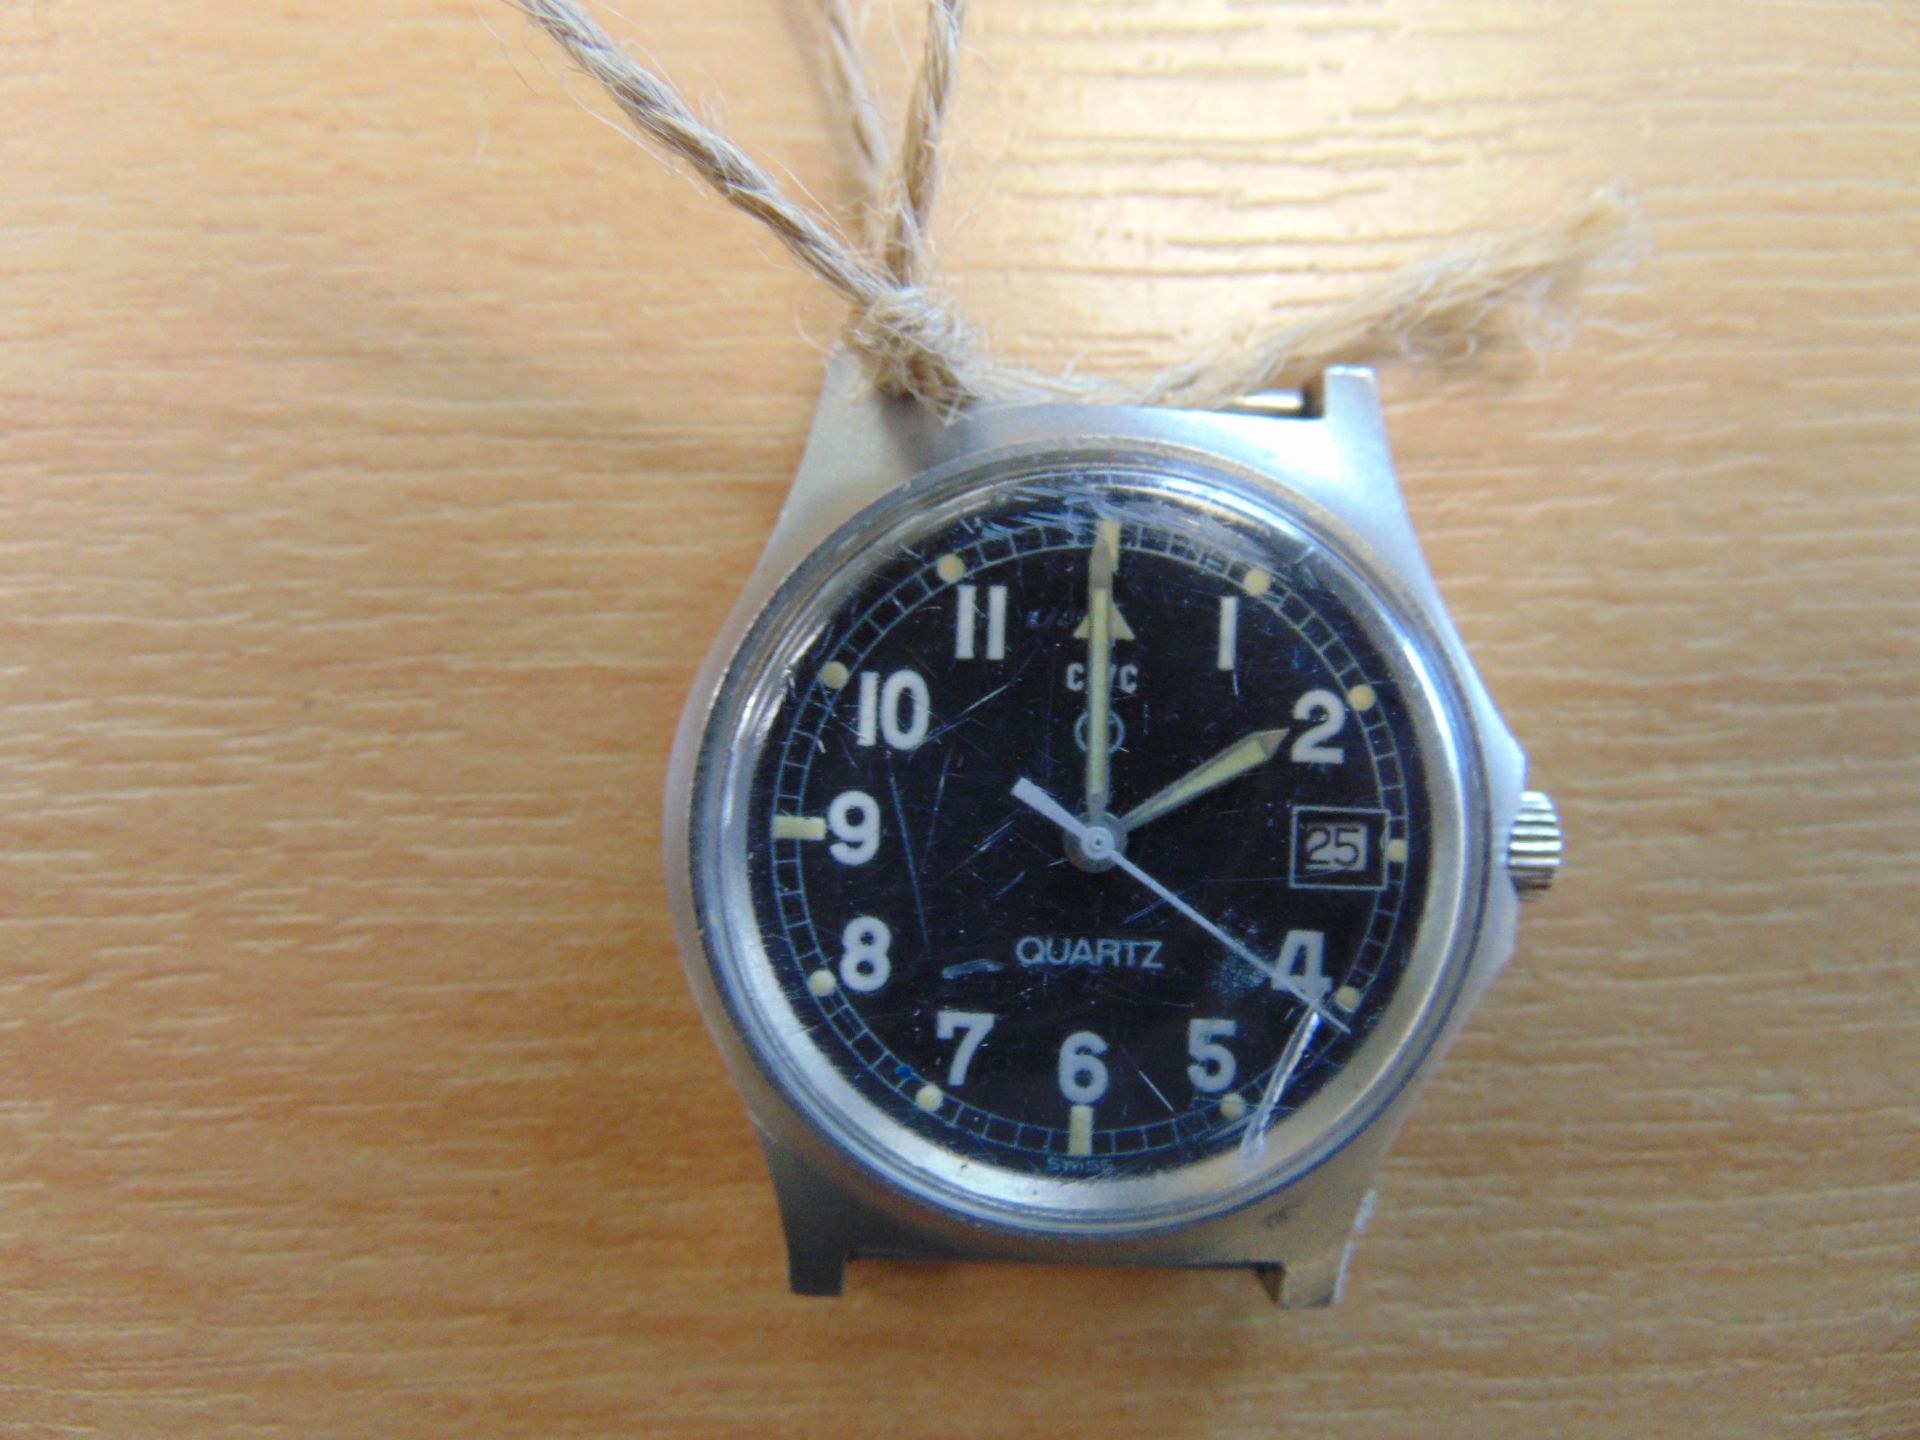 V.Rare CWC (Cabot Watch Co Switzerland), British Army FAT BOY Service Watch with Date Adjust 1981 - Image 2 of 5